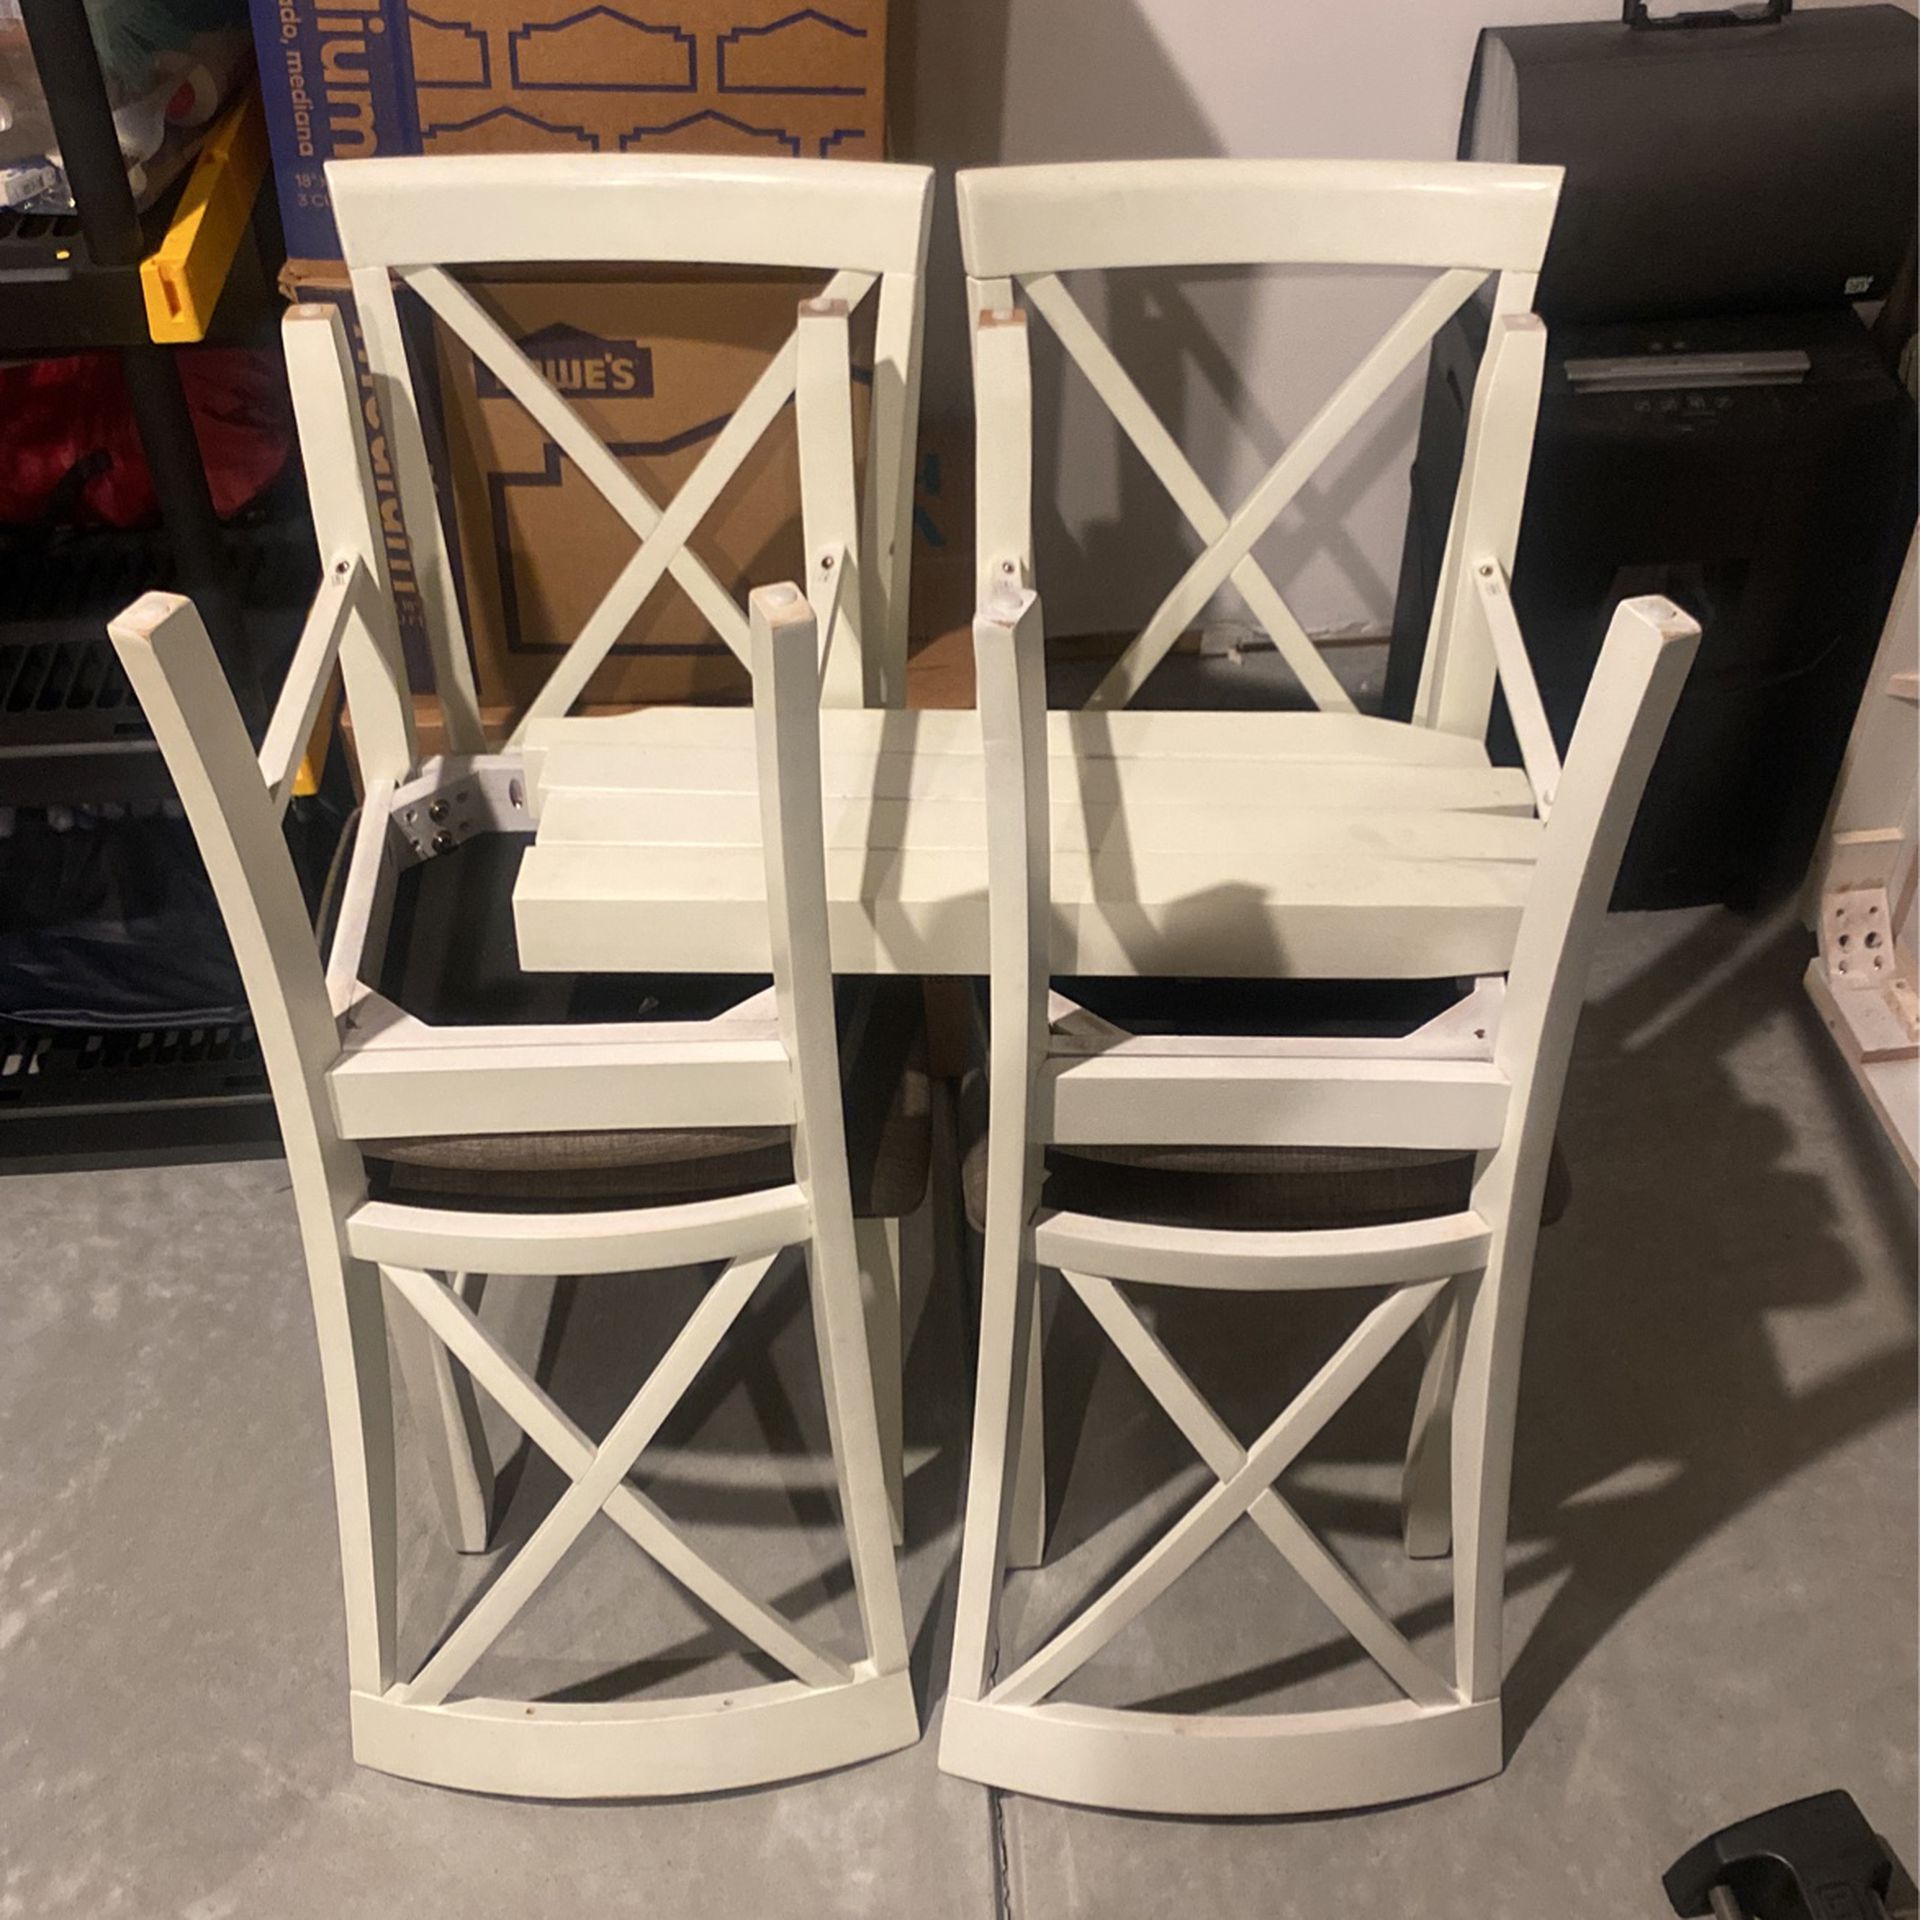 Kitchen Table Set w/ 4 Chairs